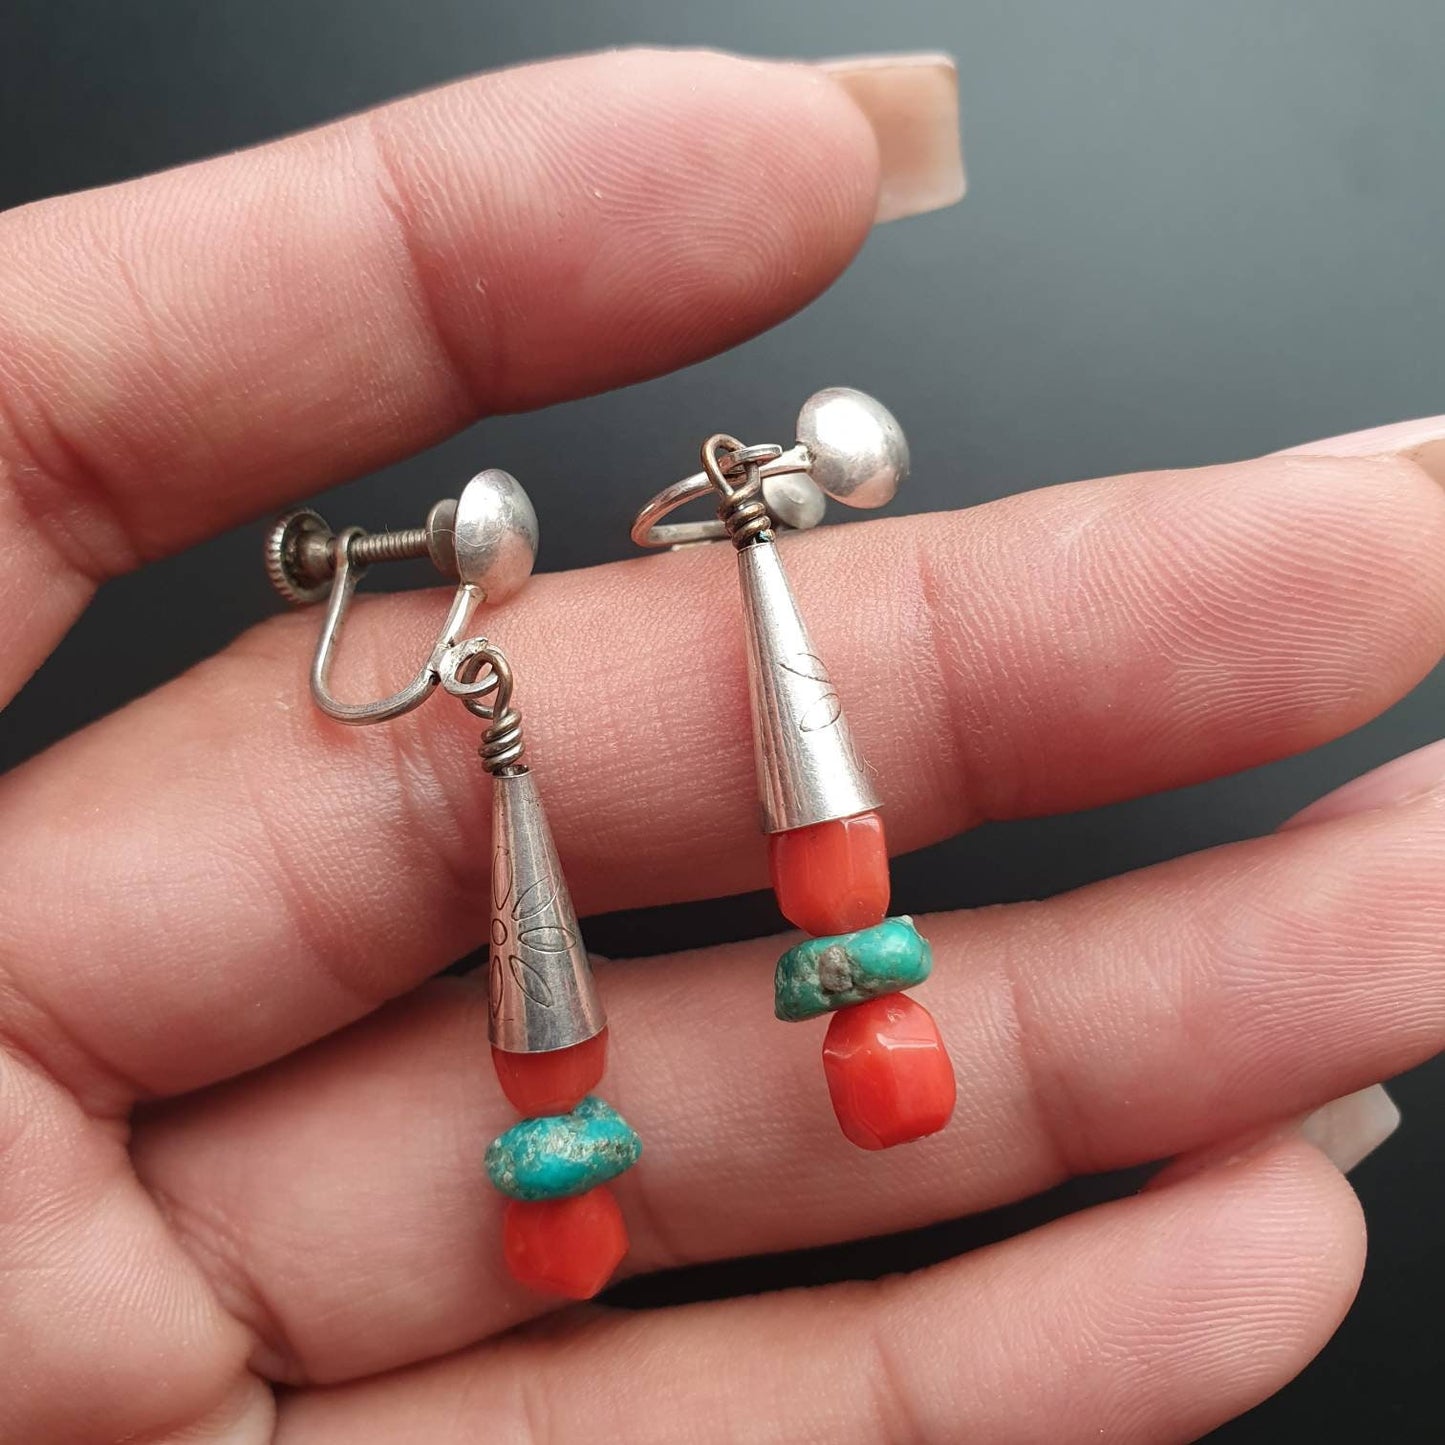 Dangle silver boho earrings, Round Bali earrings, gifts for her birthday gifts for her, ready to ship, Natural Gemstone Coral